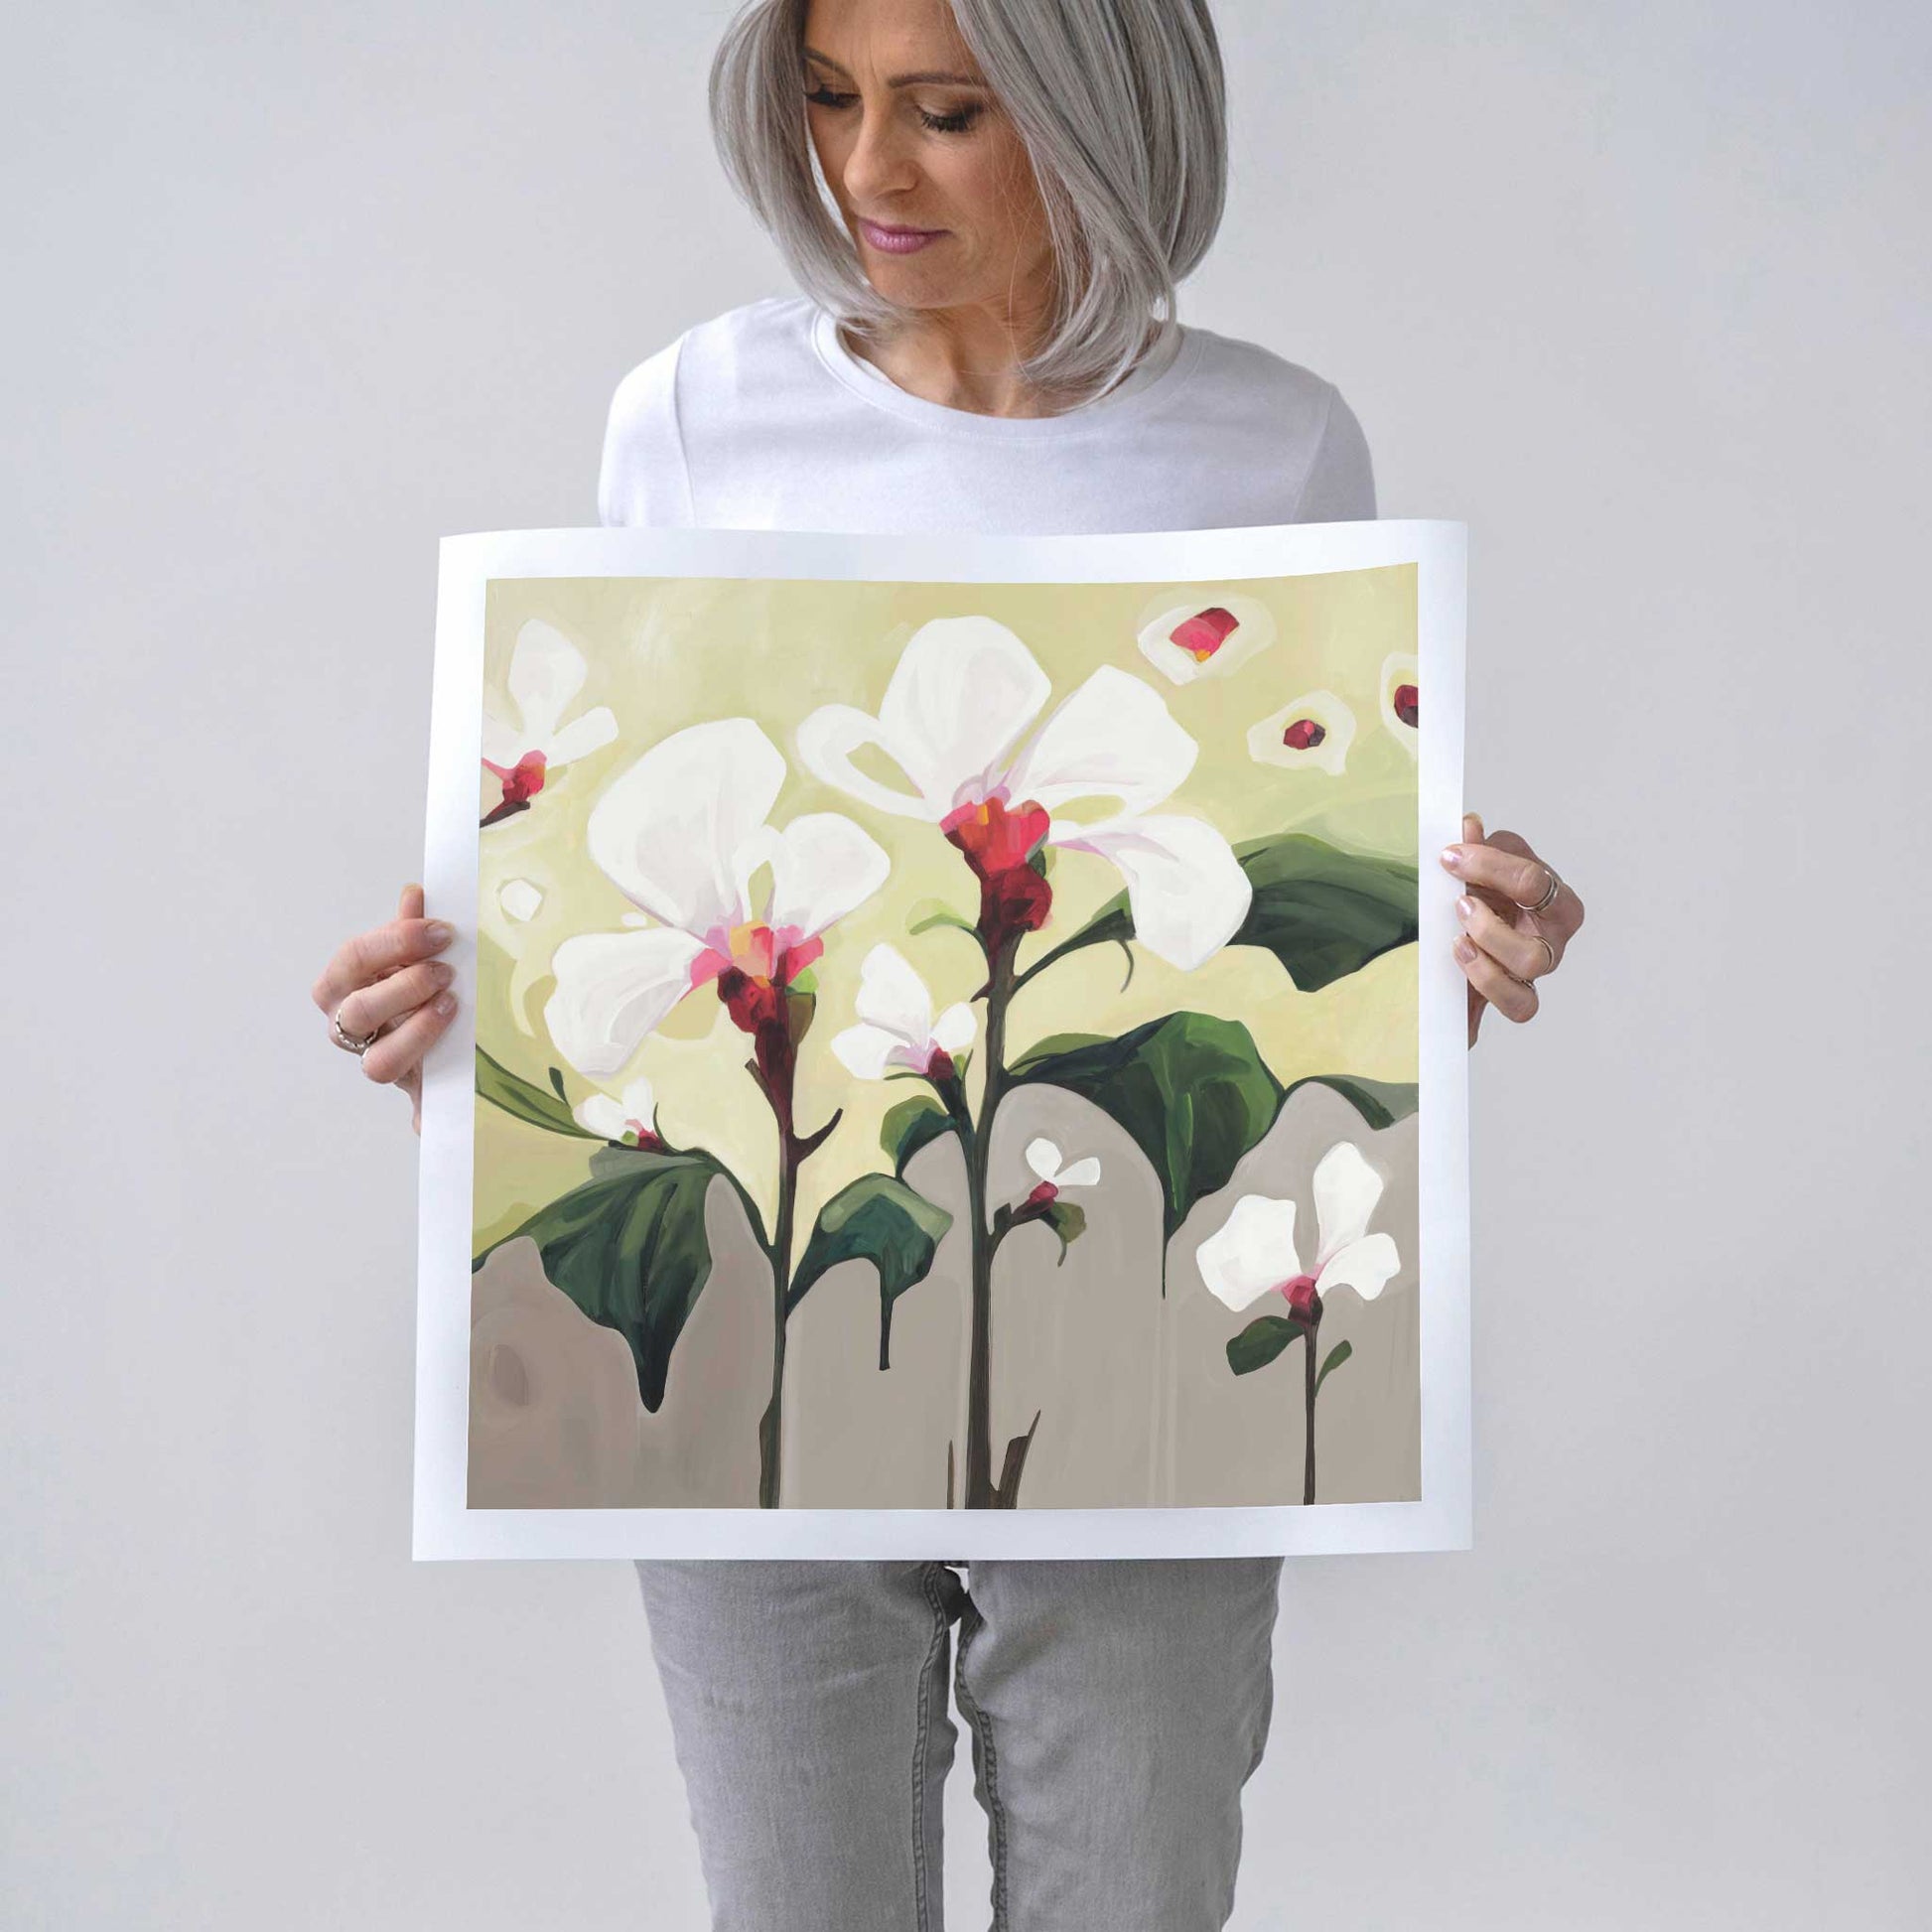 Canadian abstract artist Susannah Bleasby holding 20x20 fine art print of contemporary flower painting